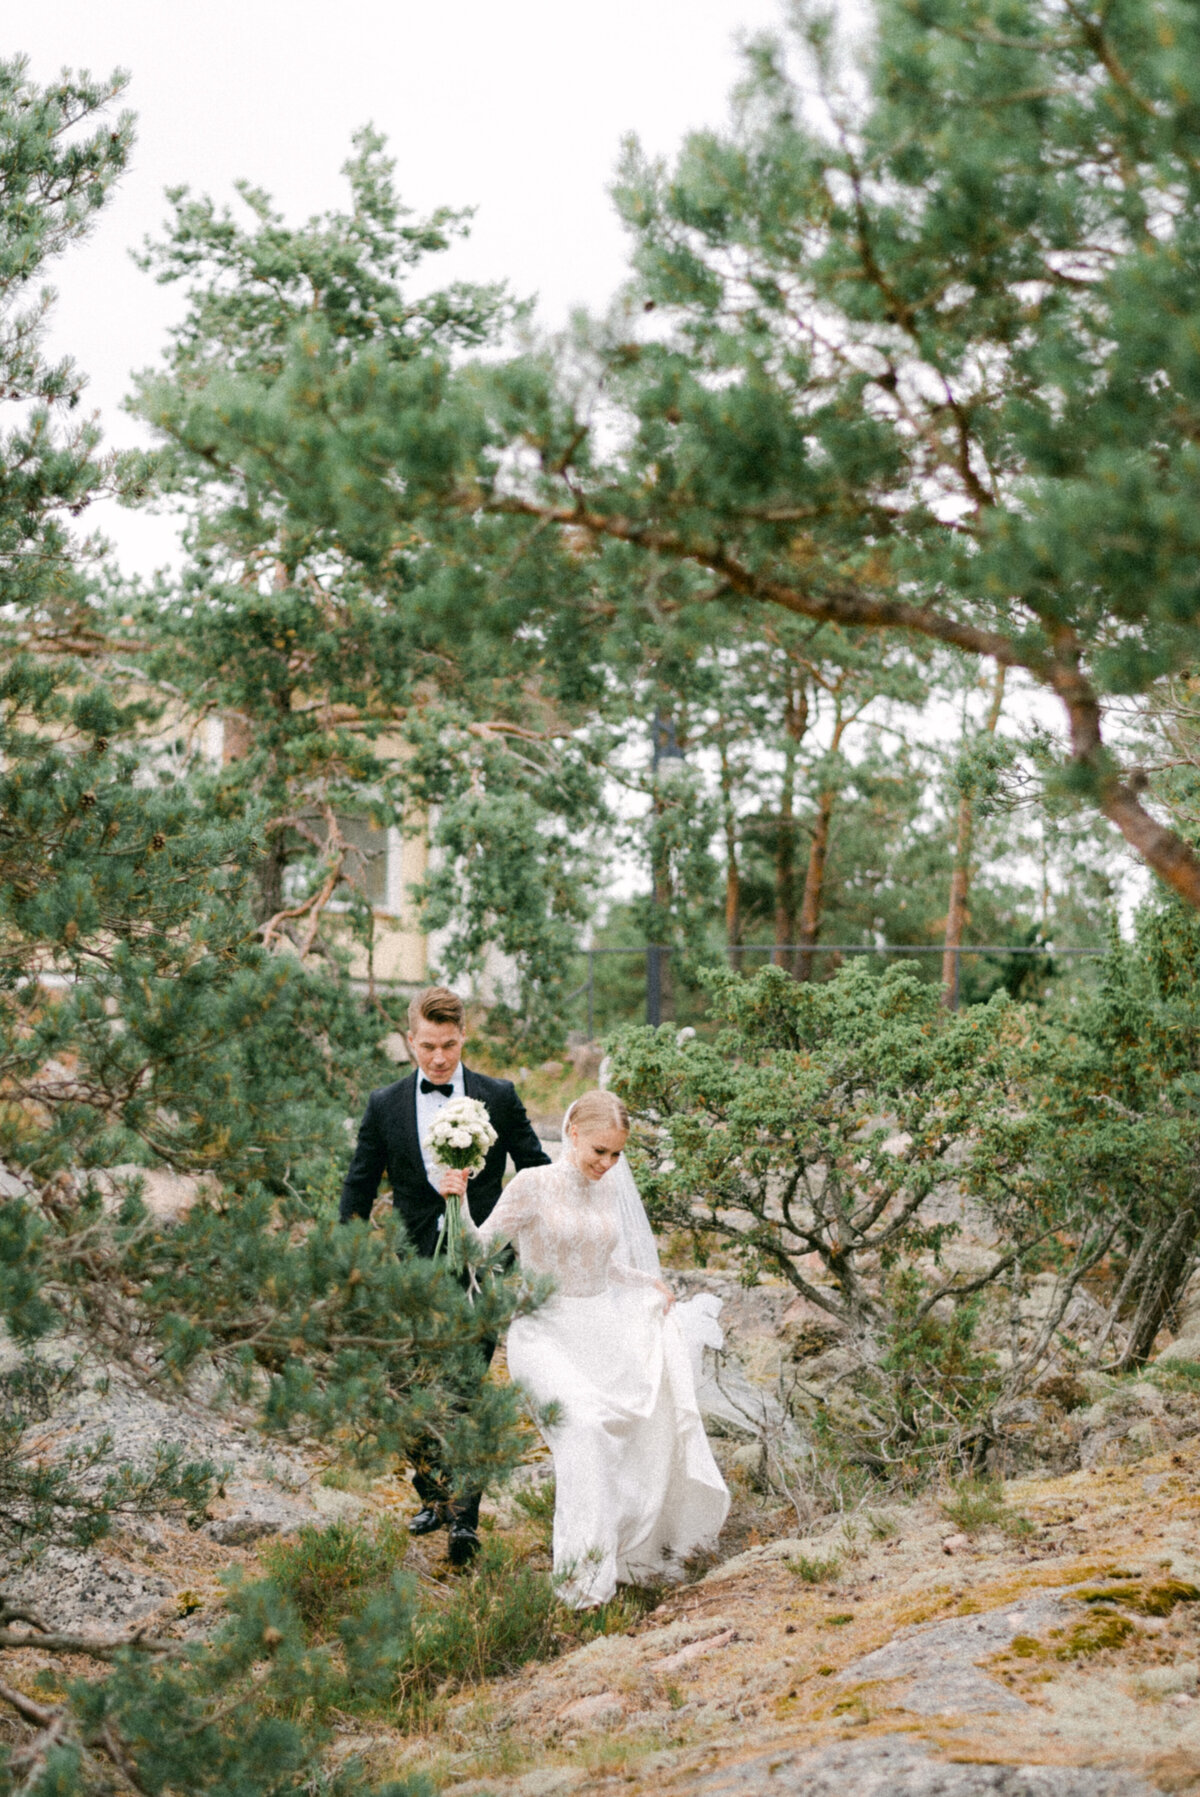 A wedding couple walking in the forest in Finland during a photoshoot with wedding photographer Hannika Gabrielsson.